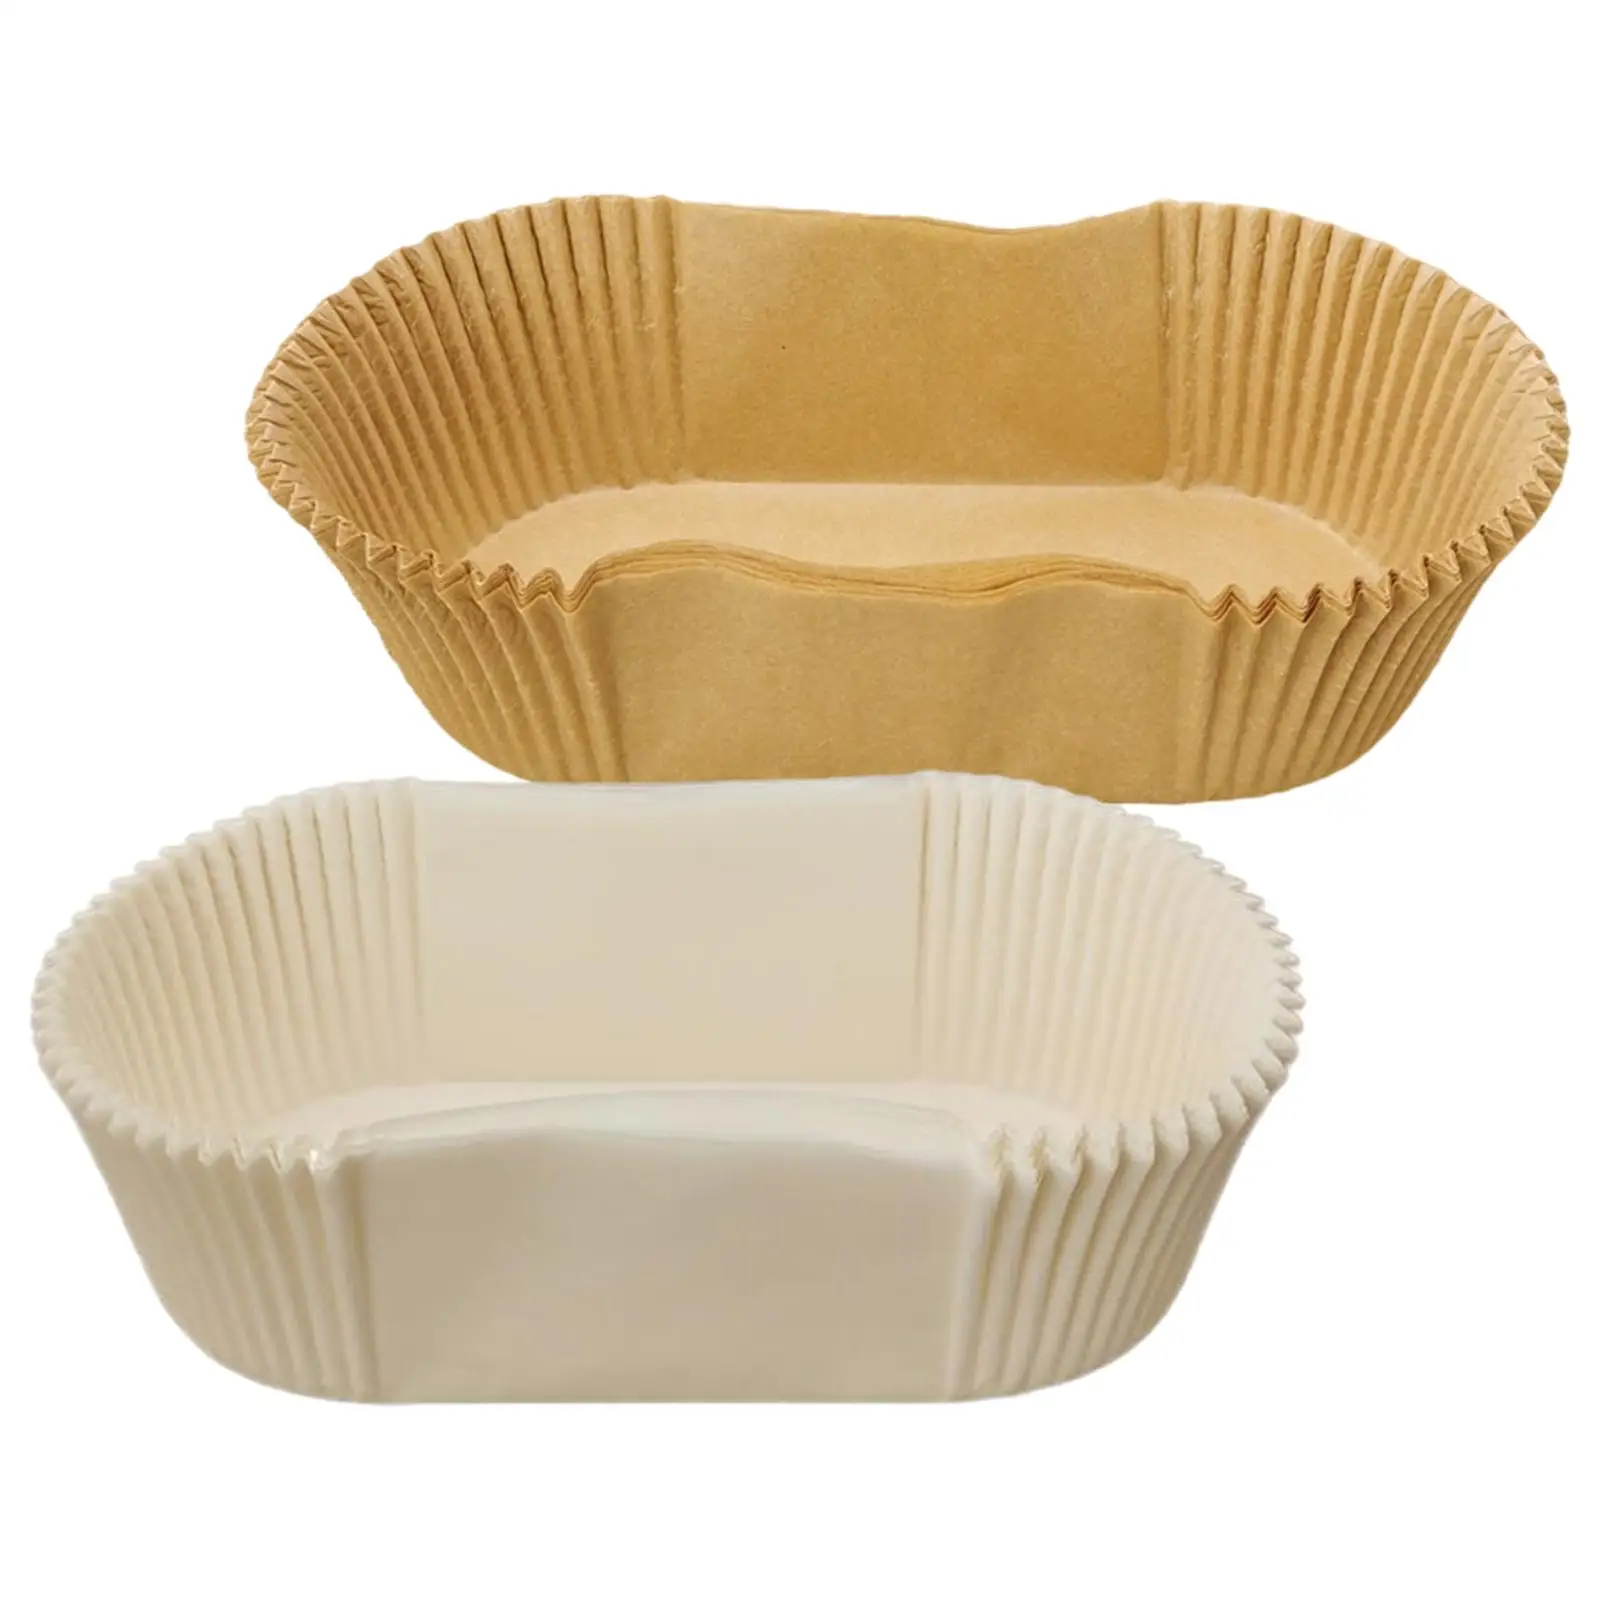 40 Pieces Paper Baking Cup Rectangle High Temperature for Dessert Cake Balls